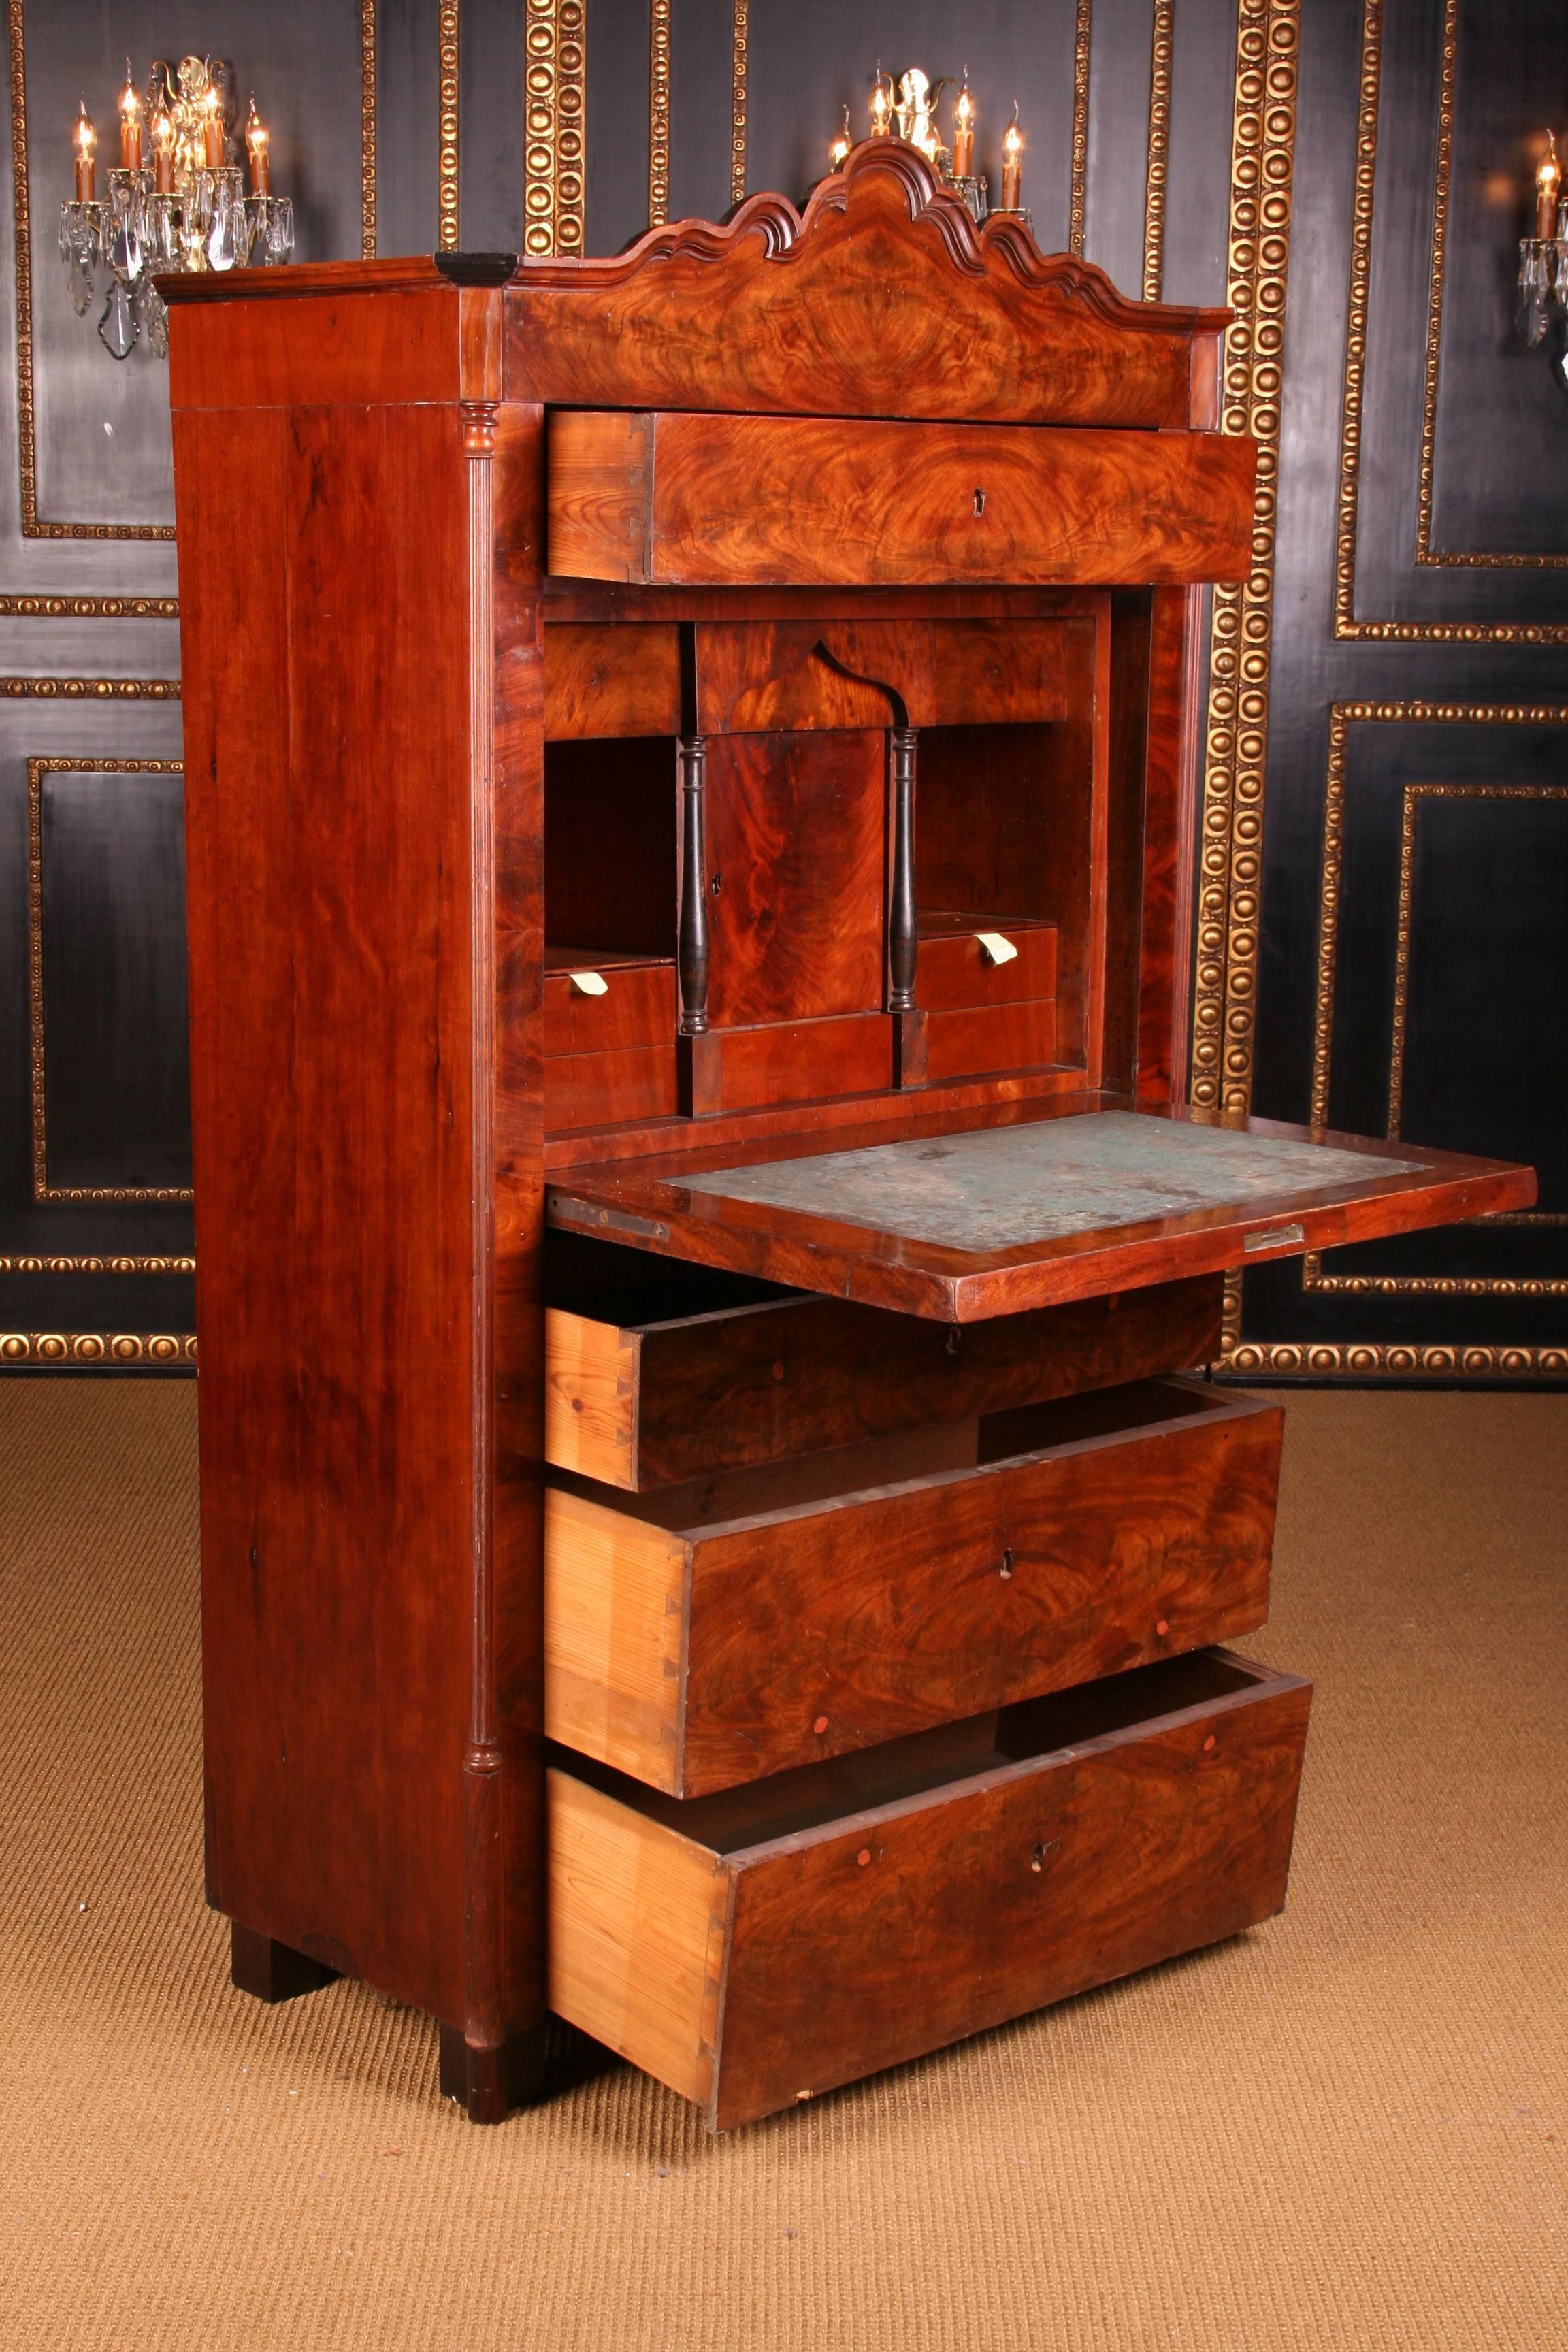 Mahogany on solid pinewood. High-right body on block-feet. Straight writing plate with a medallion-shaped depression. Behind it, architecturally designed interior. Curved cornice, flanked by Amphora-shaped ornamental elements. This secretaire is in